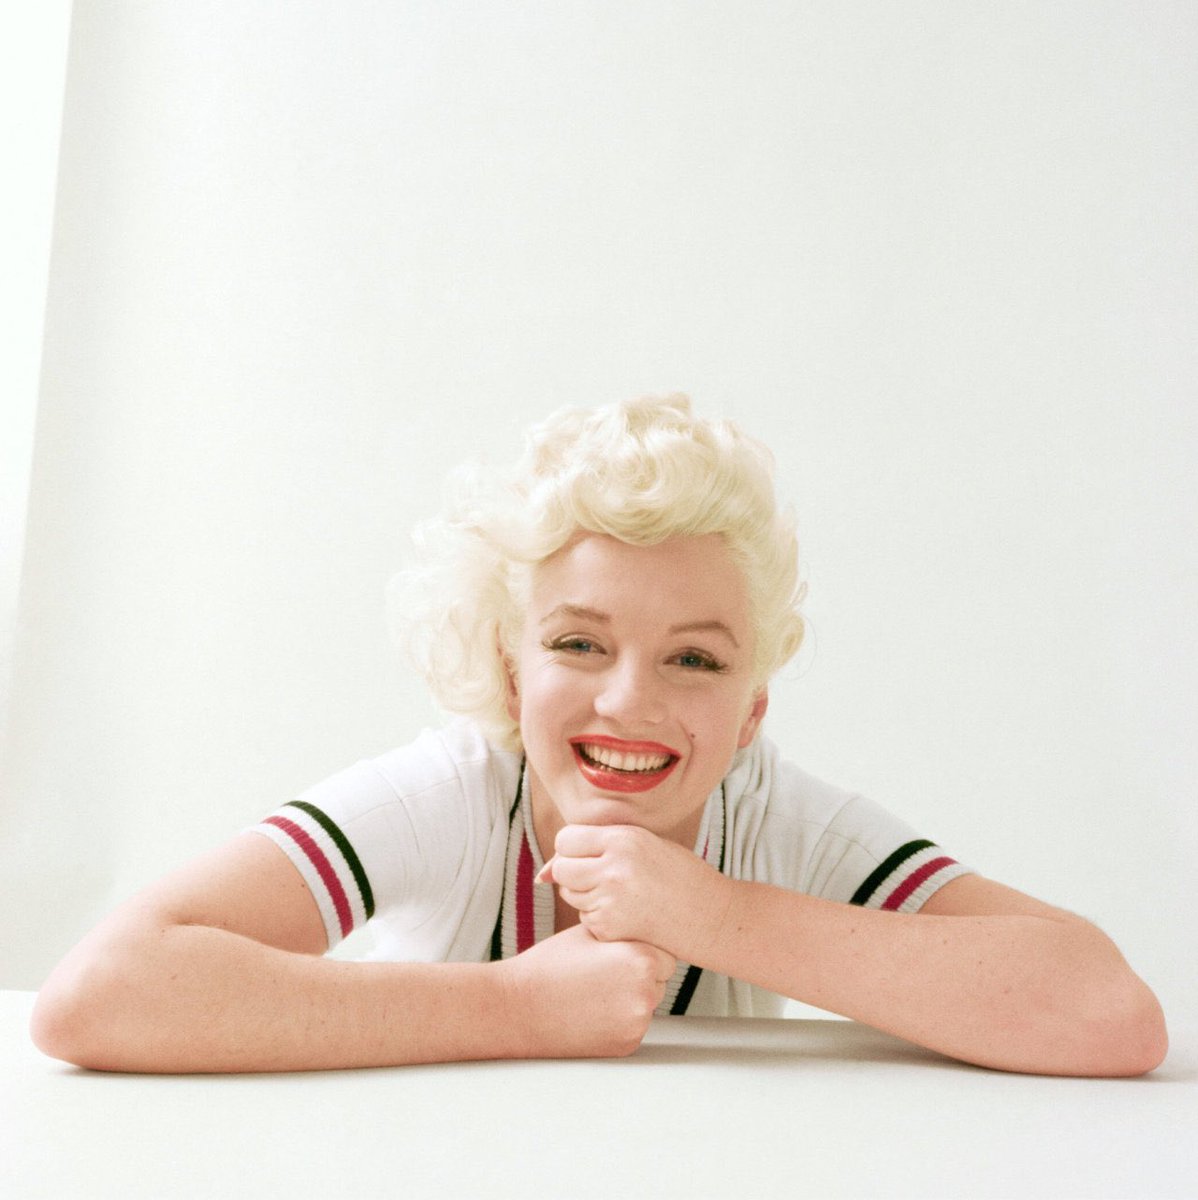 Aug ‘55, #MarilynMonroe posed for #MiltonGreene in a v-neck tennis shirt 
“I don't think sun-tanned skin is any more attractive than white skin, or any healthier, for that matter. I’m personally opposed to a deep tan because I like to feel #blonde all over.” to Pageant Mag, 1952.